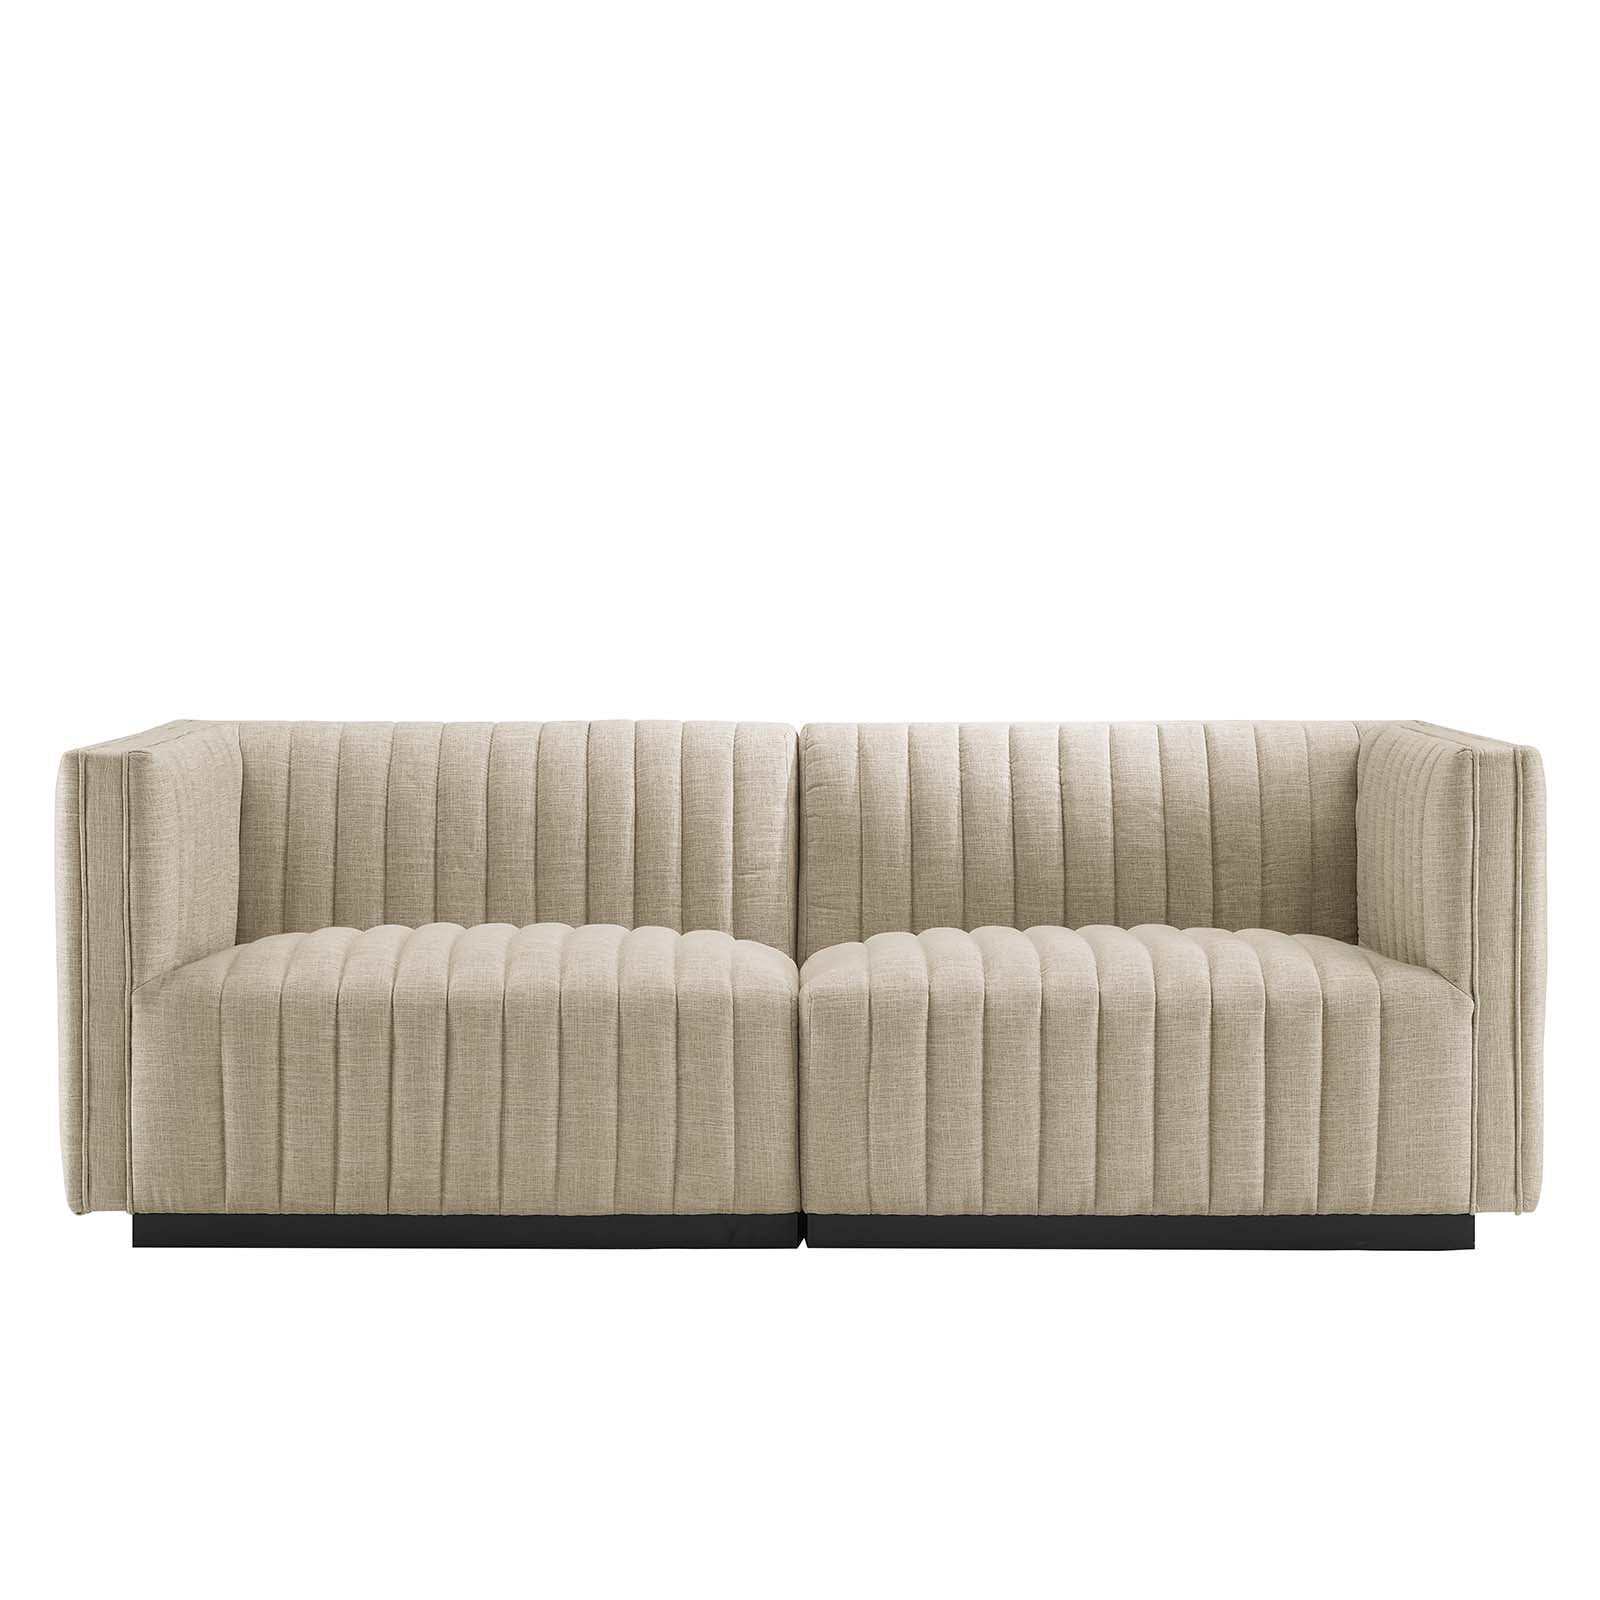 Modway Loveseats - Conjure Channel Tufted Upholstered Fabric Loveseat Black Beige